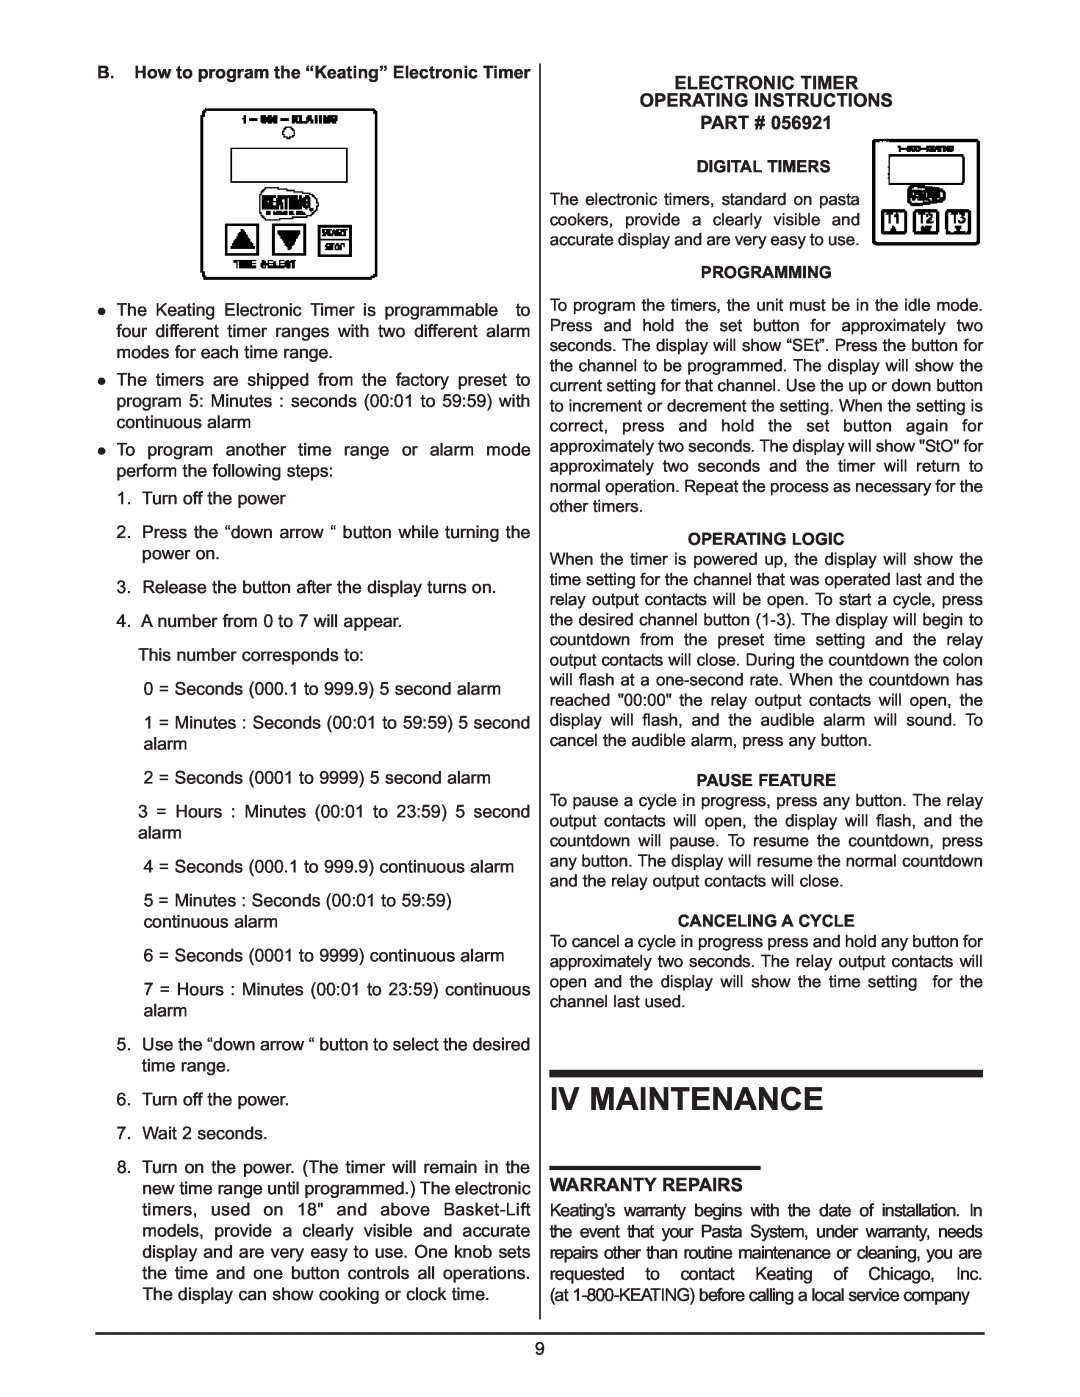 Keating Of Chicago 0107 service manual Iv Maintenance, Electronic Timer Operating Instructions Part #, Warranty Repairs 